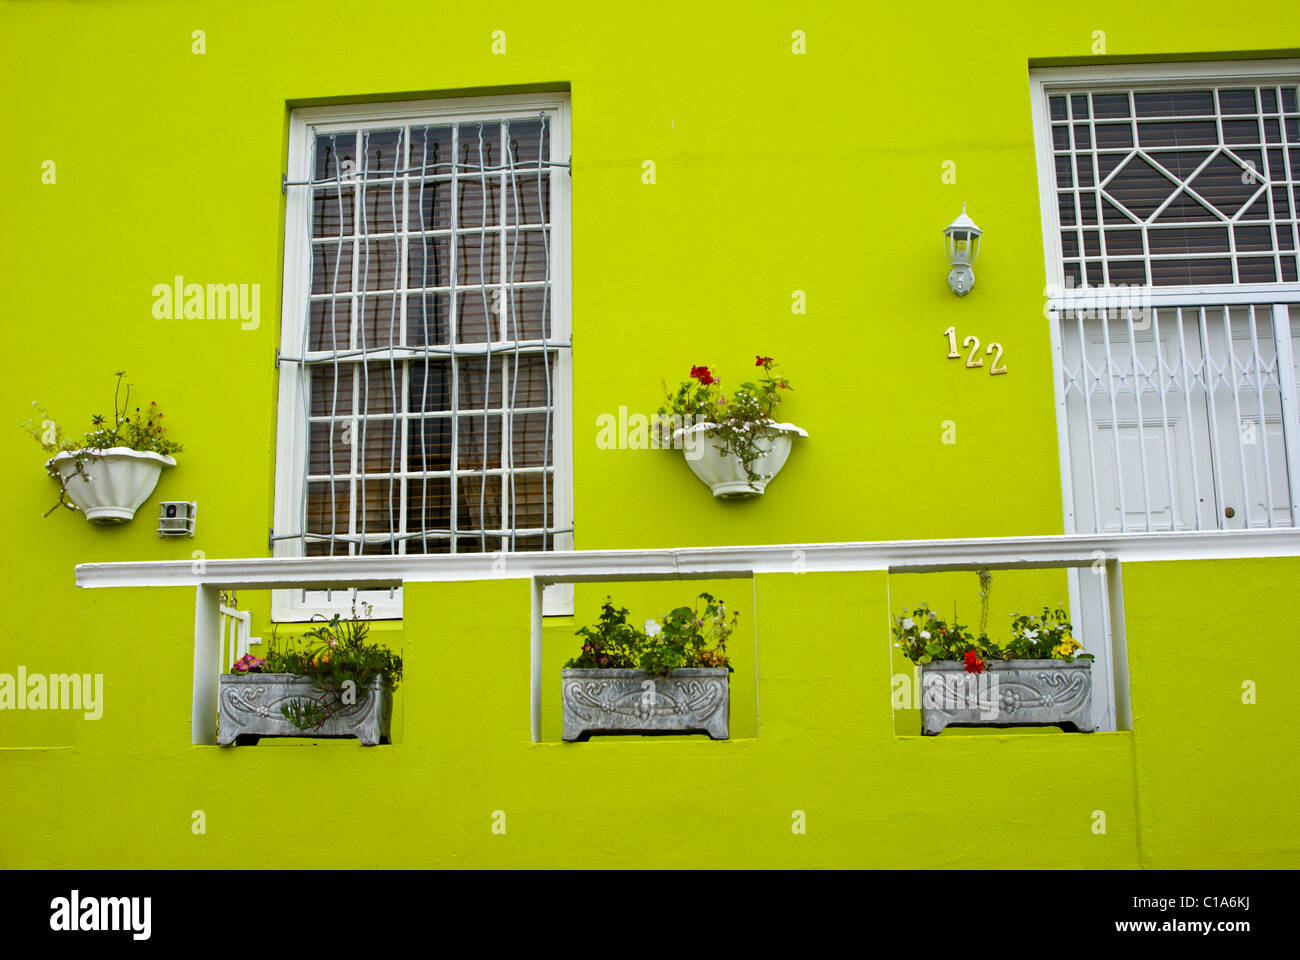 Bo-Kaap Malay Quarter, Cape Town, Western Cape, South Africa Stock Photo